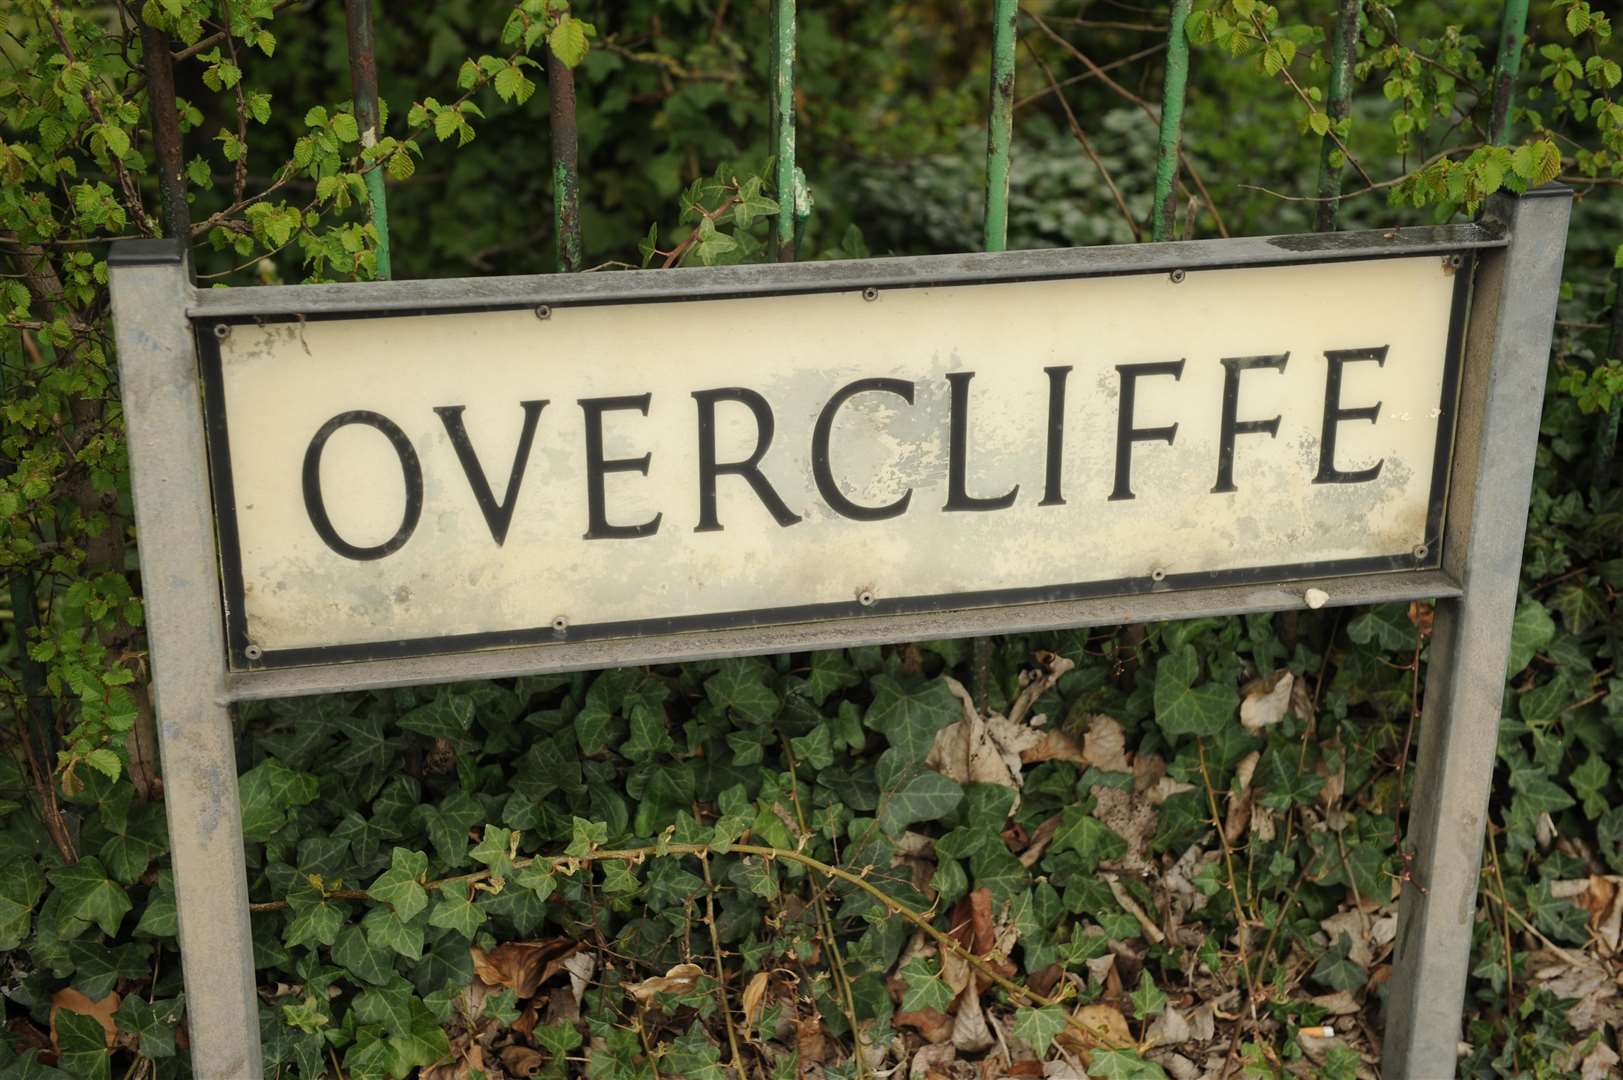 The Overcliffe in Gravesend